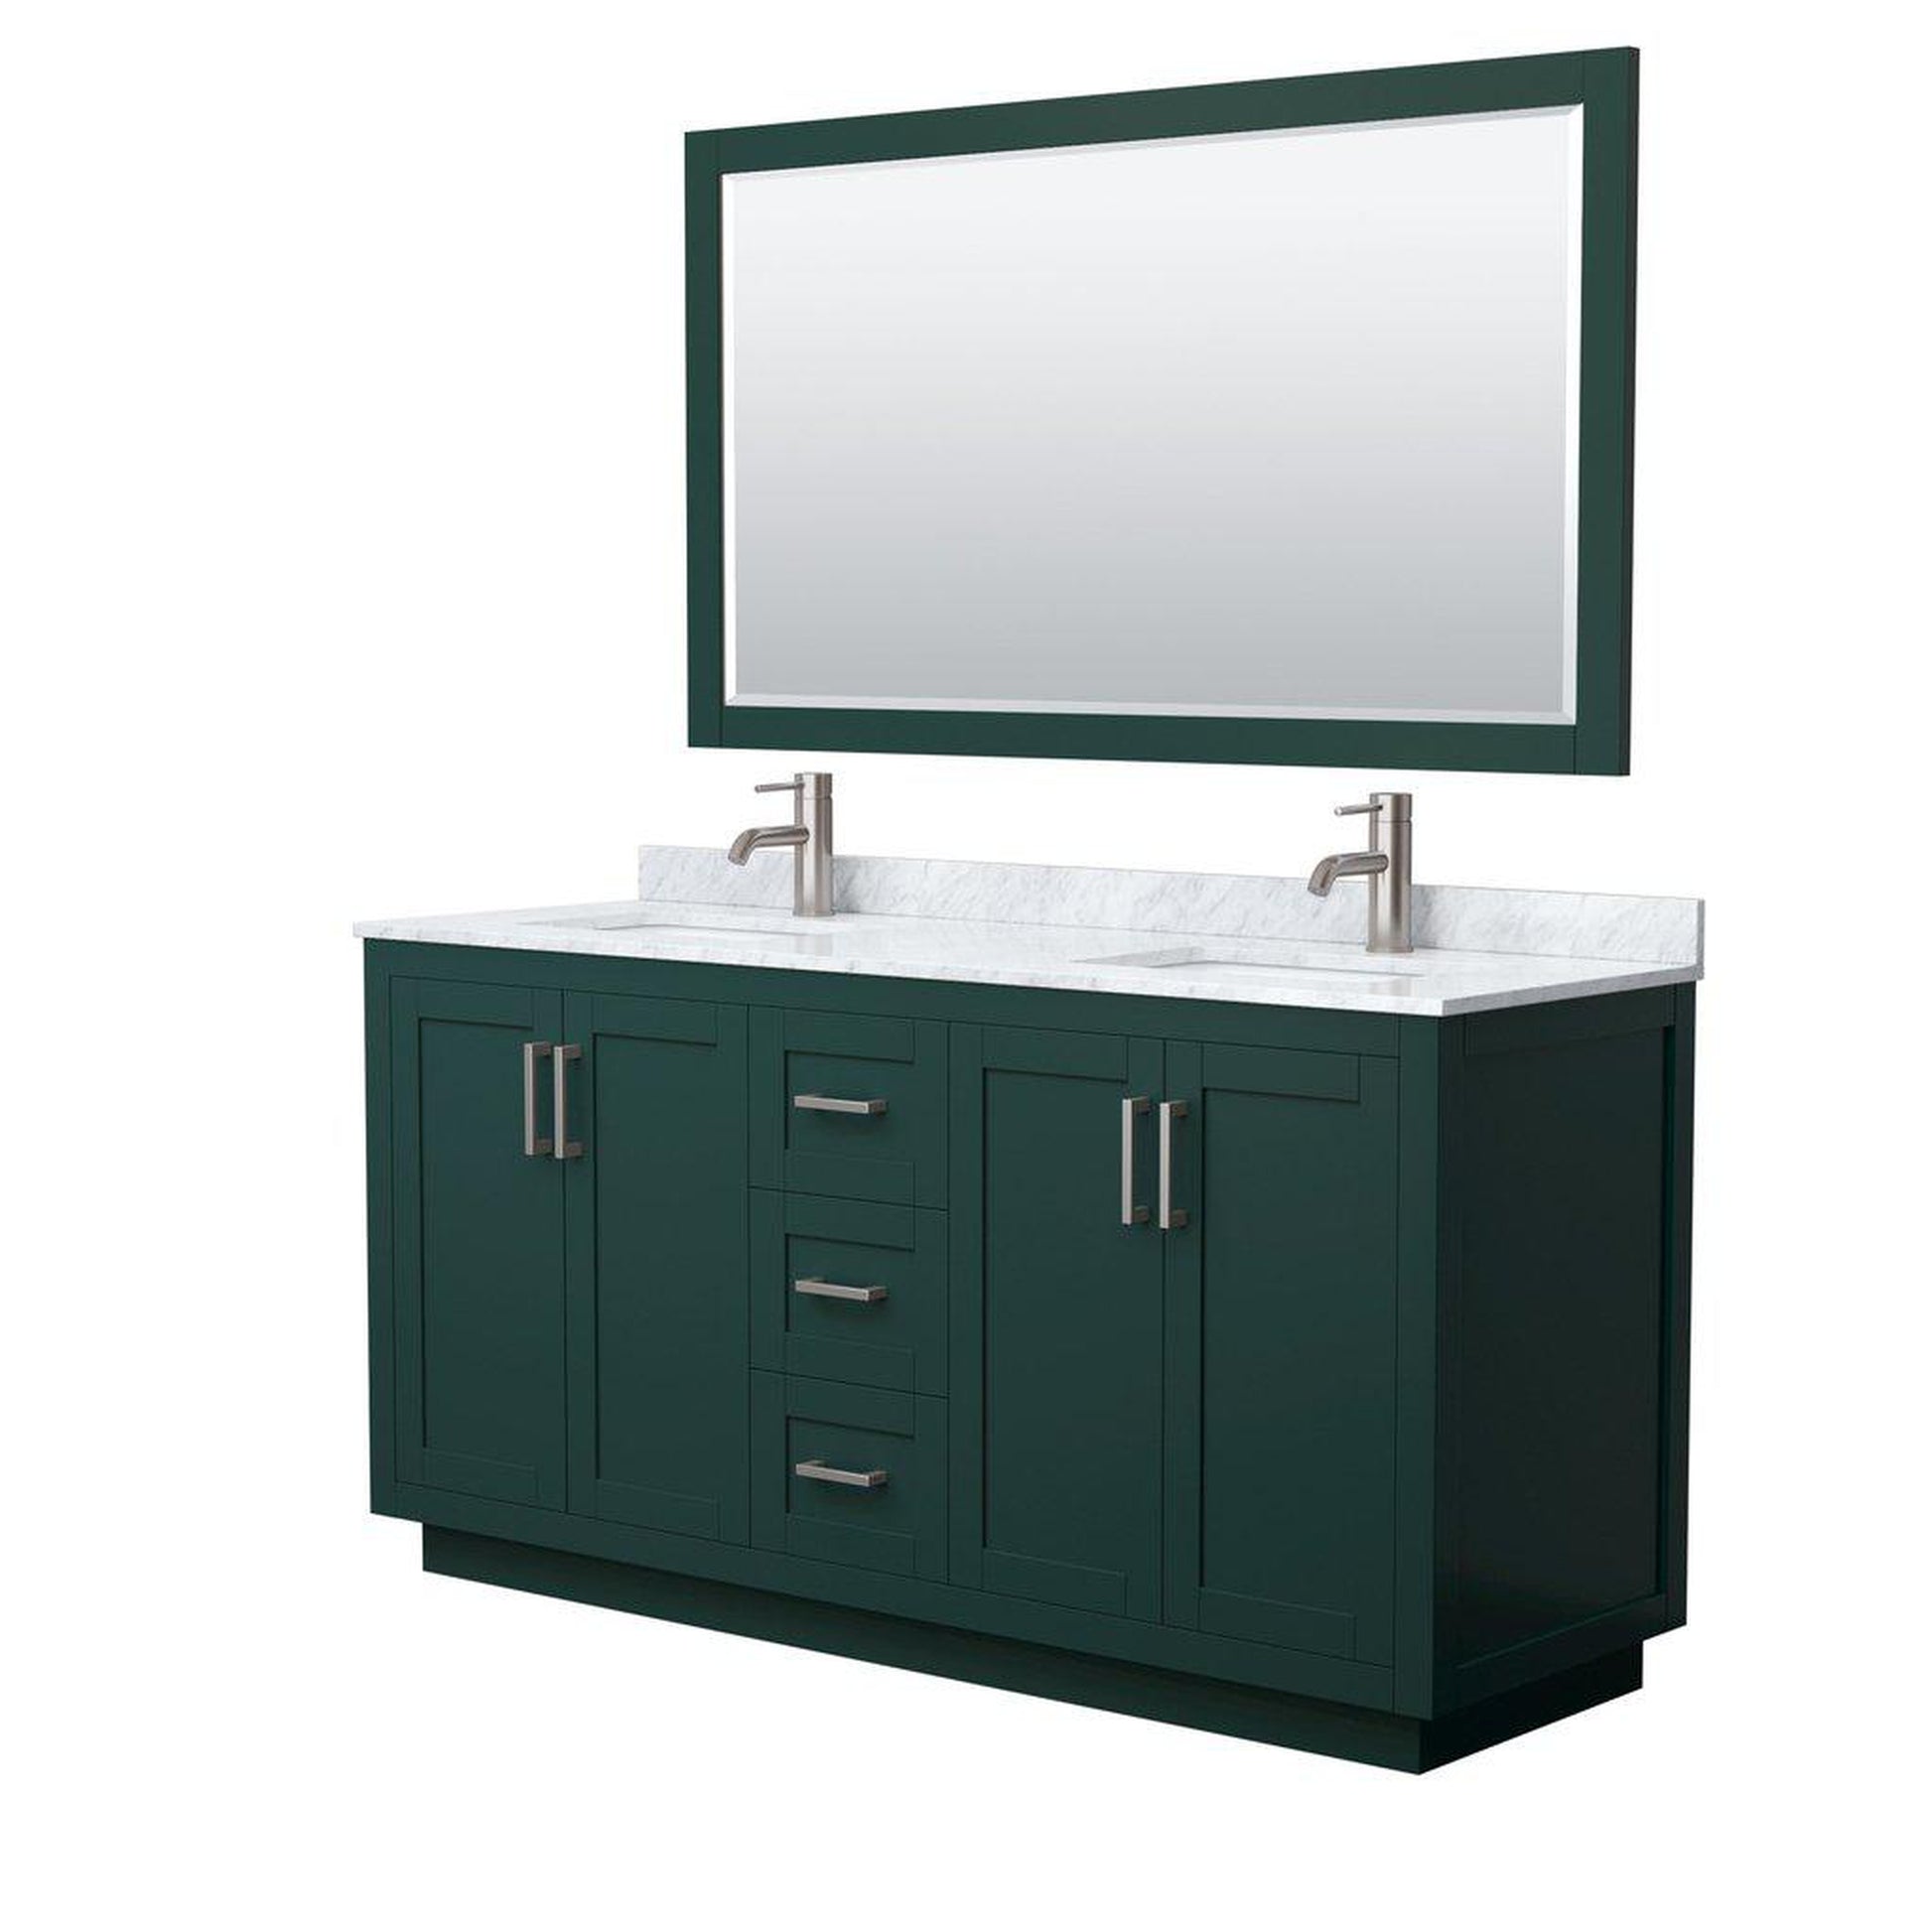 Wyndham Collection Miranda 66" Double Bathroom Green Vanity Set With White Carrara Marble Countertop, Undermount Square Sink, 58" Mirror And Brushed Nickel Trim